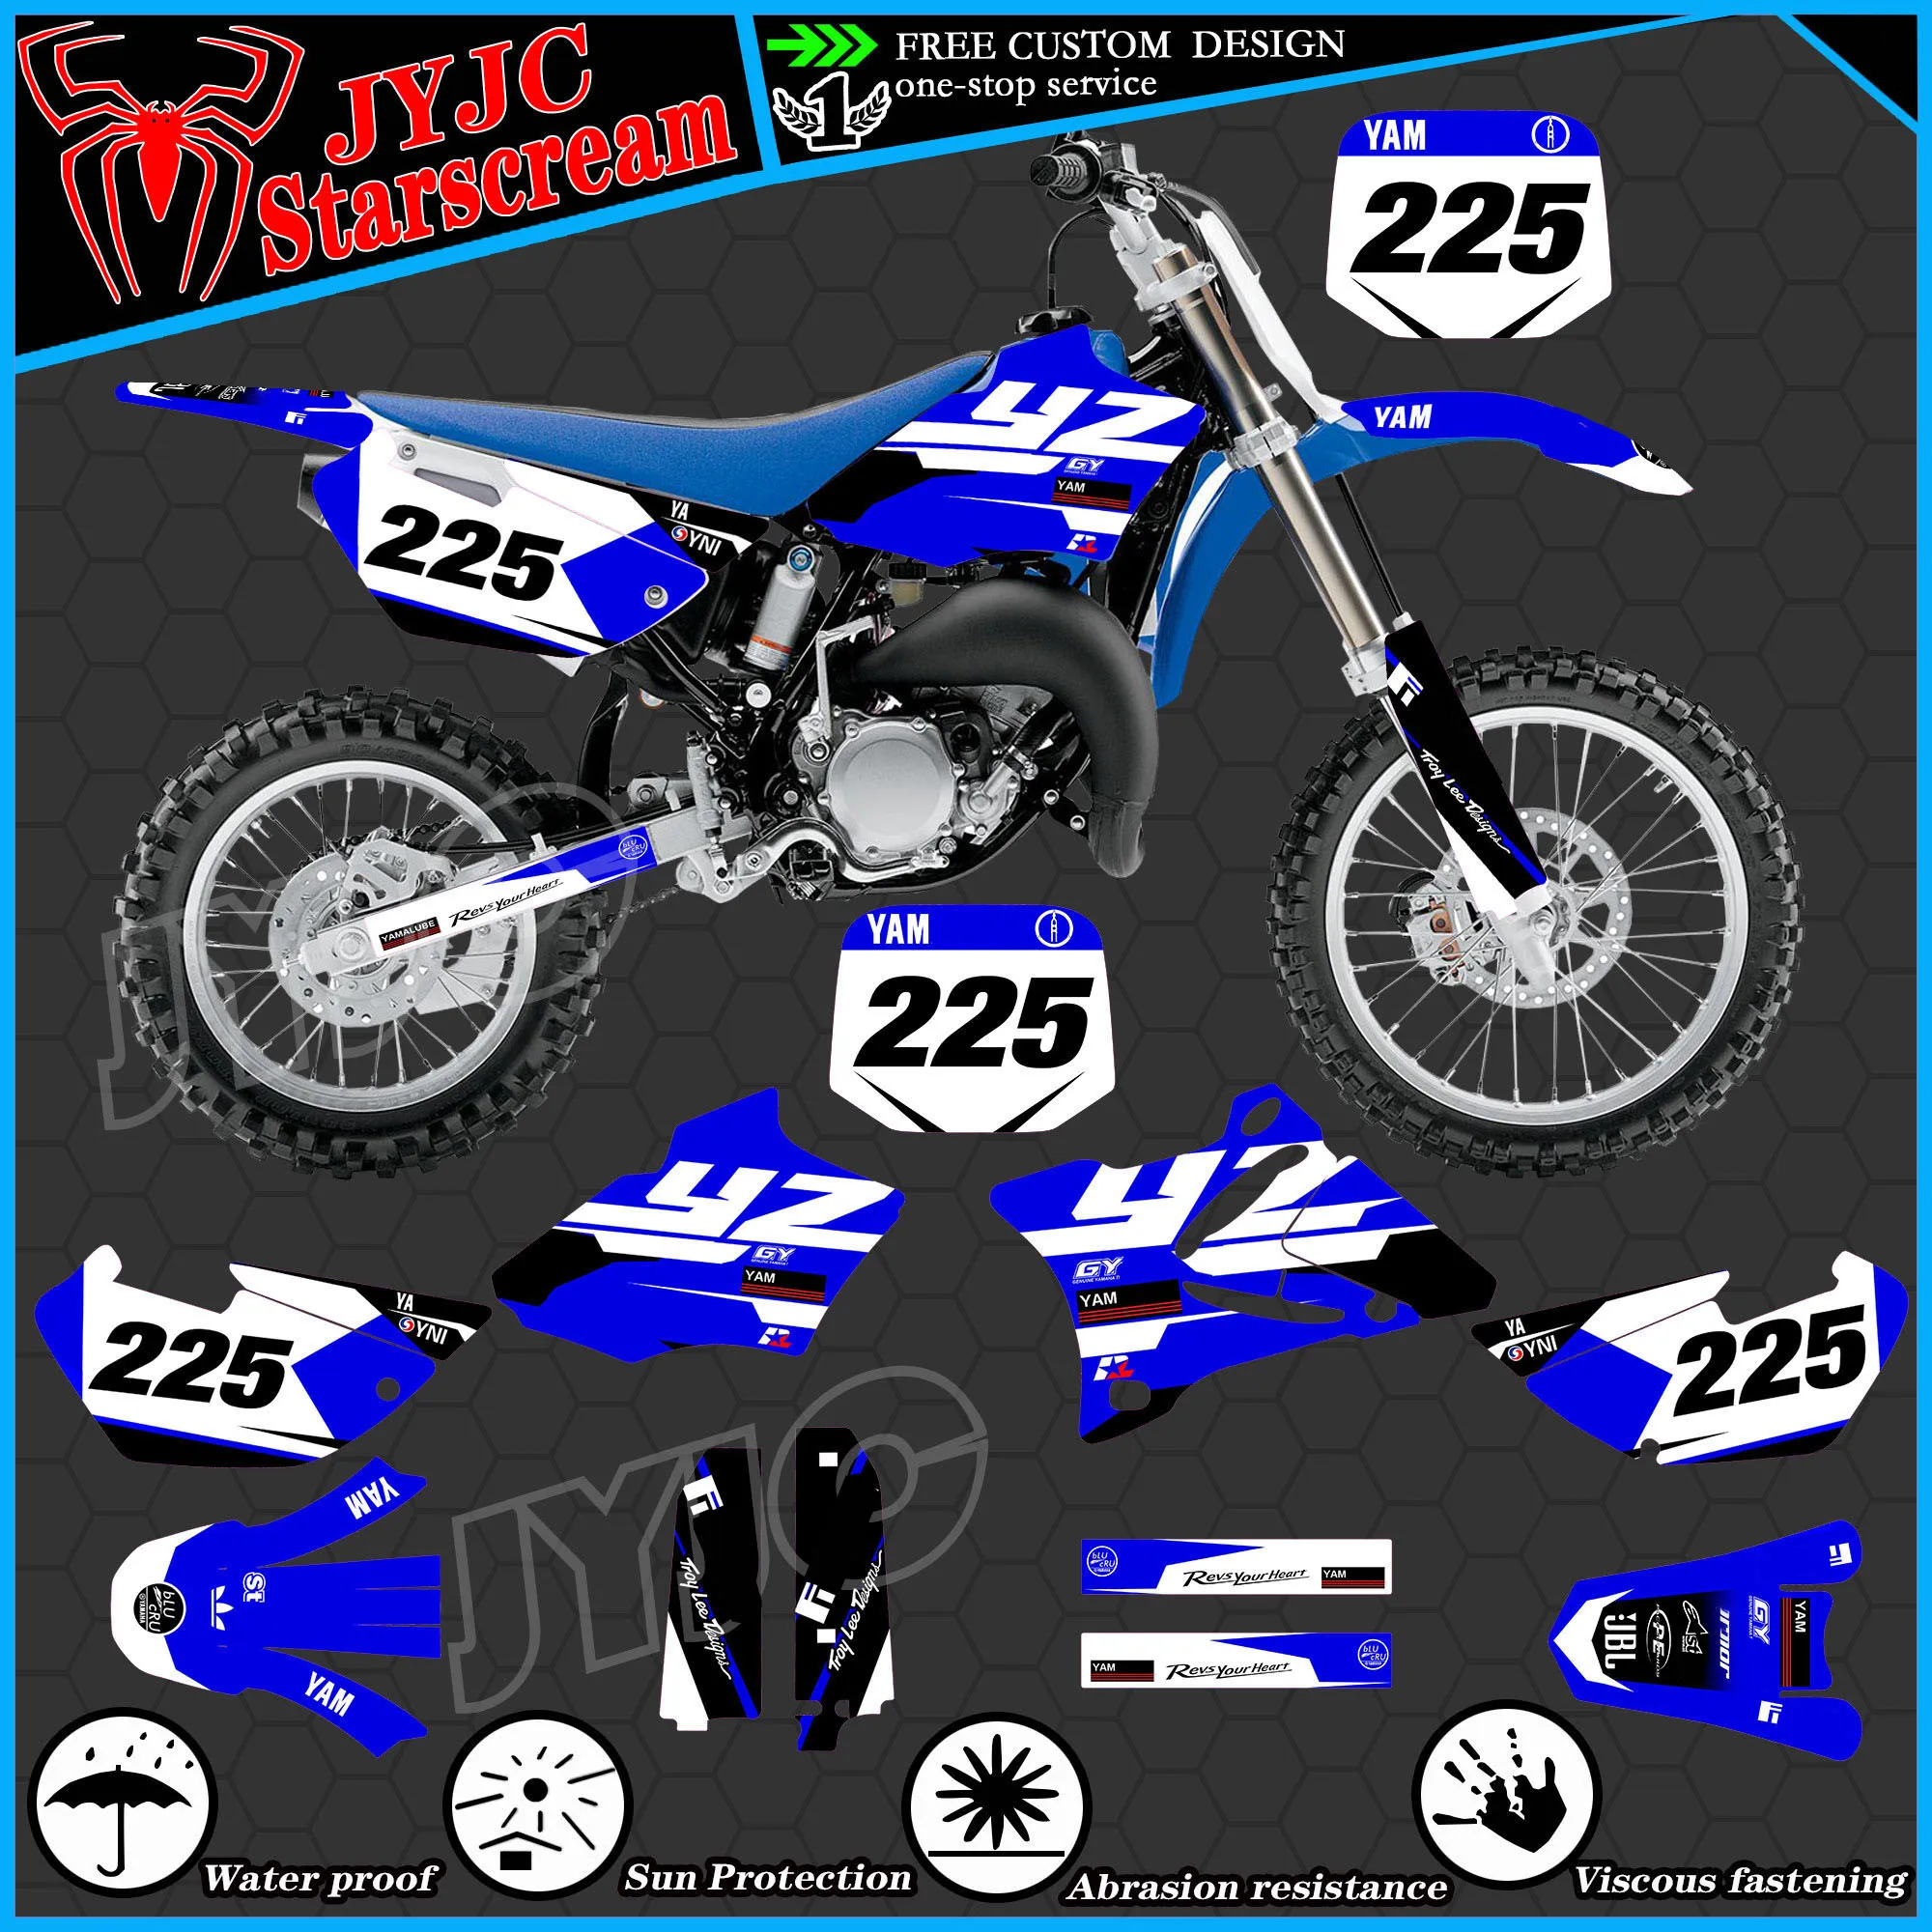 Graphic Kit for YAMAHA 2002 2003 2004 2005 2006 2007 2008 2009 2010 2011 2012 2013 2014 YZ85 Motorcycle Decal Stickers luckmoto stickers decals graphics kits for yamaha yz125 yz250 2002 2005 2006 2007 2008 2009 2010 2011 2012 2013 2014 yz 250